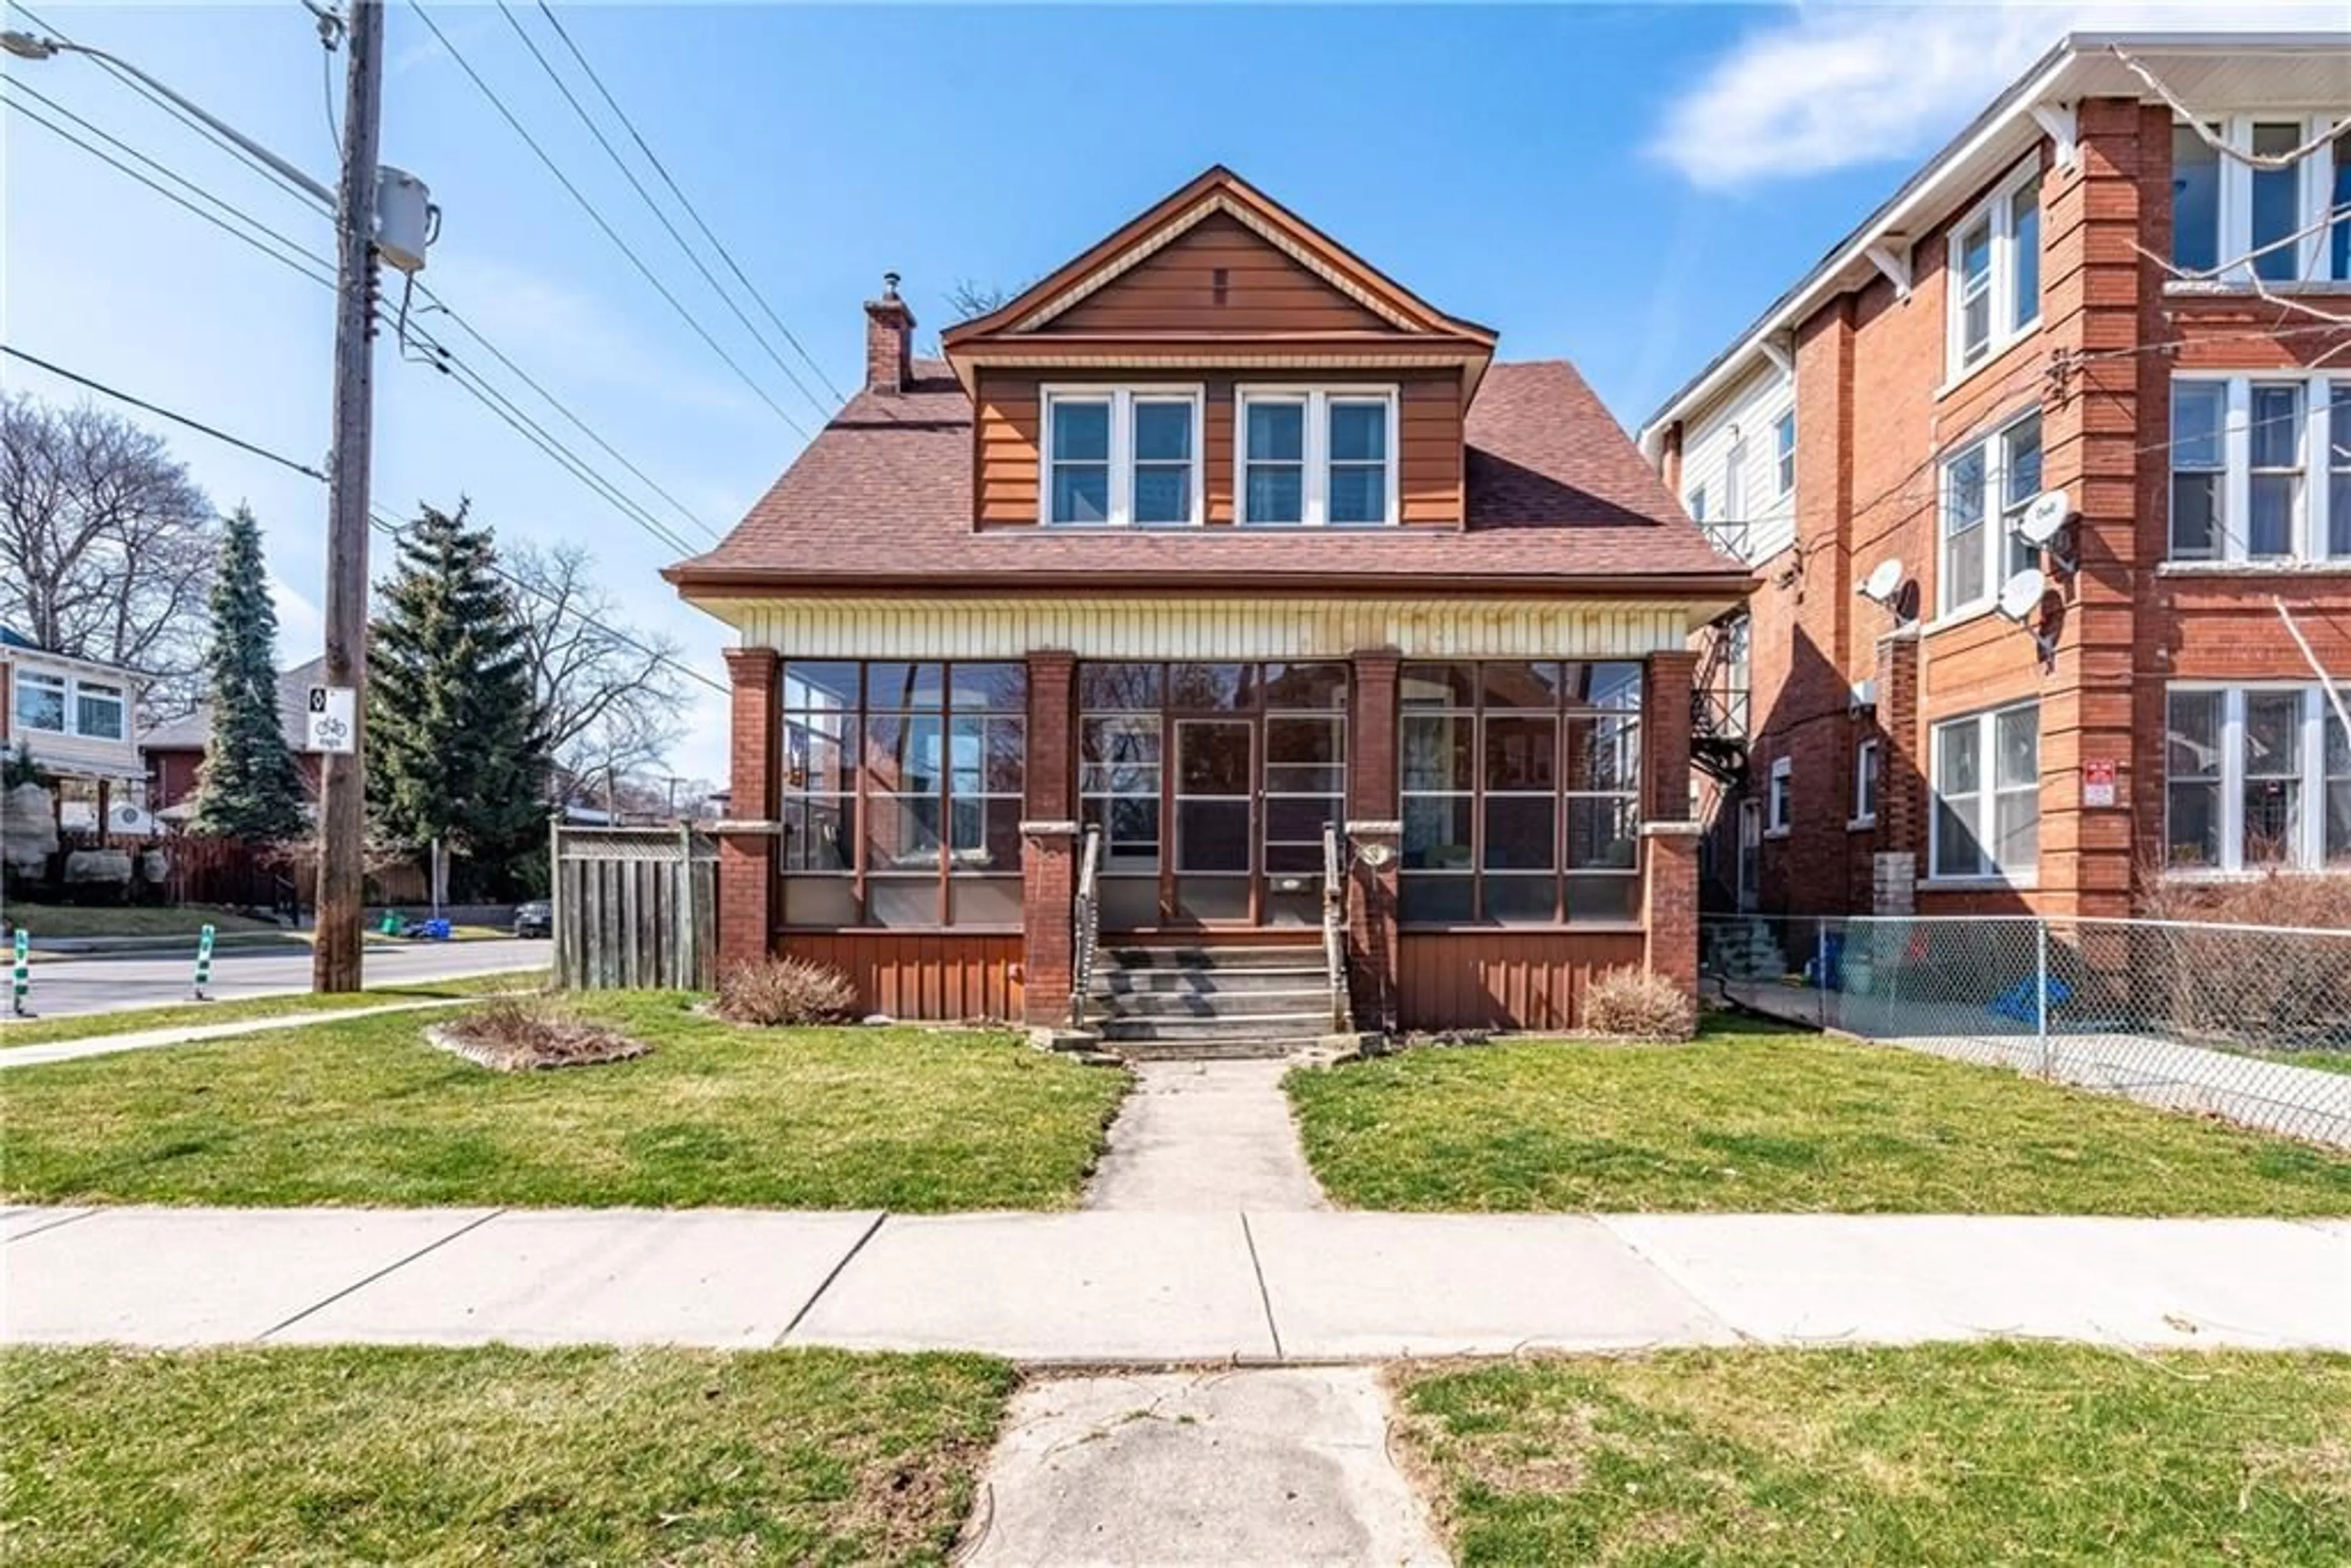 Home with brick exterior material for 52 Blake St, Hamilton Ontario L8M 2S5